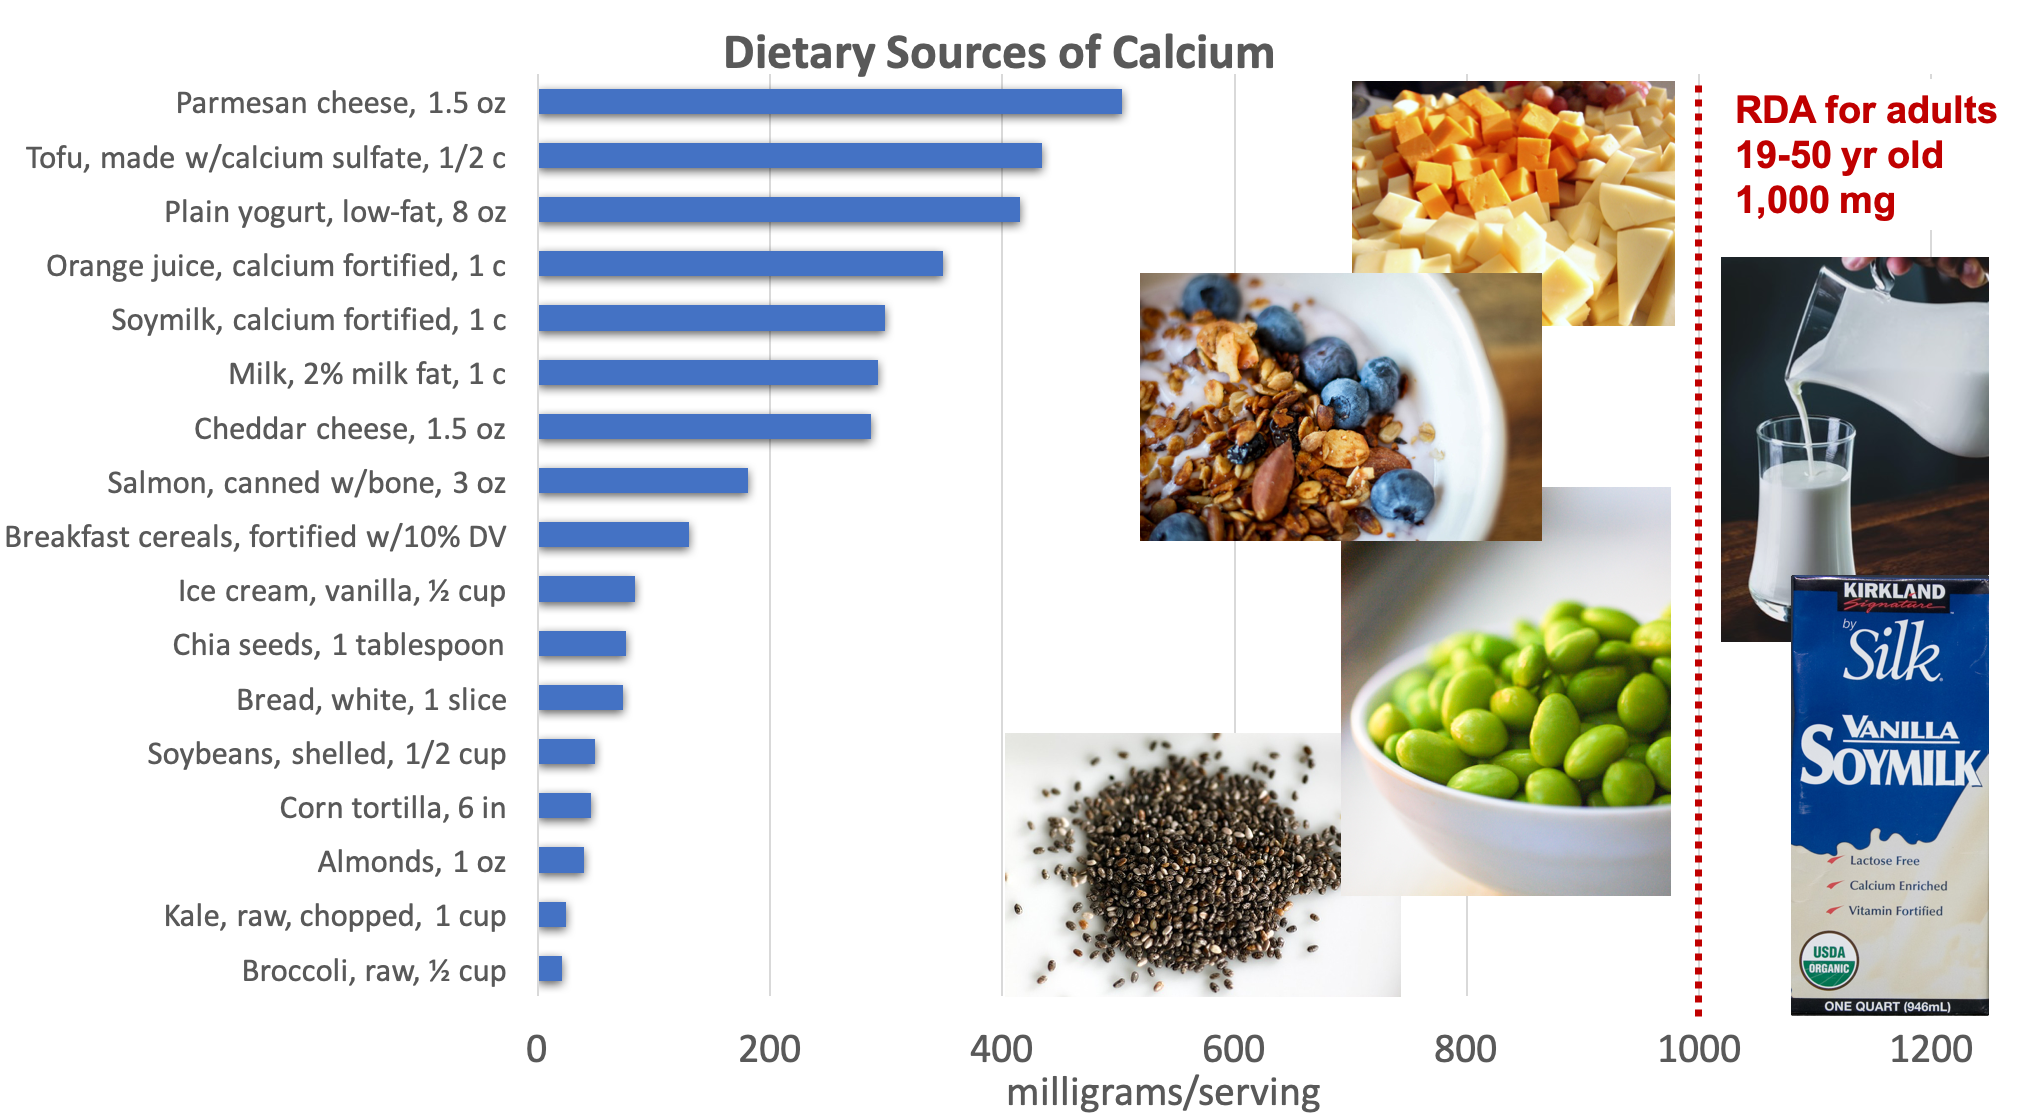 Bar graph showing dietary sources of calcium compared with the RDA adults of 1,000 mg. Top sources include cheese, tofu, yogurt, fortified orange juice and soymilk, milk, canned salmon with bones, and fortified breakfast cereals. Food sources pictured include cheese, milk, soymilk, yogurt with almonds, soybeans, and chia seeds.